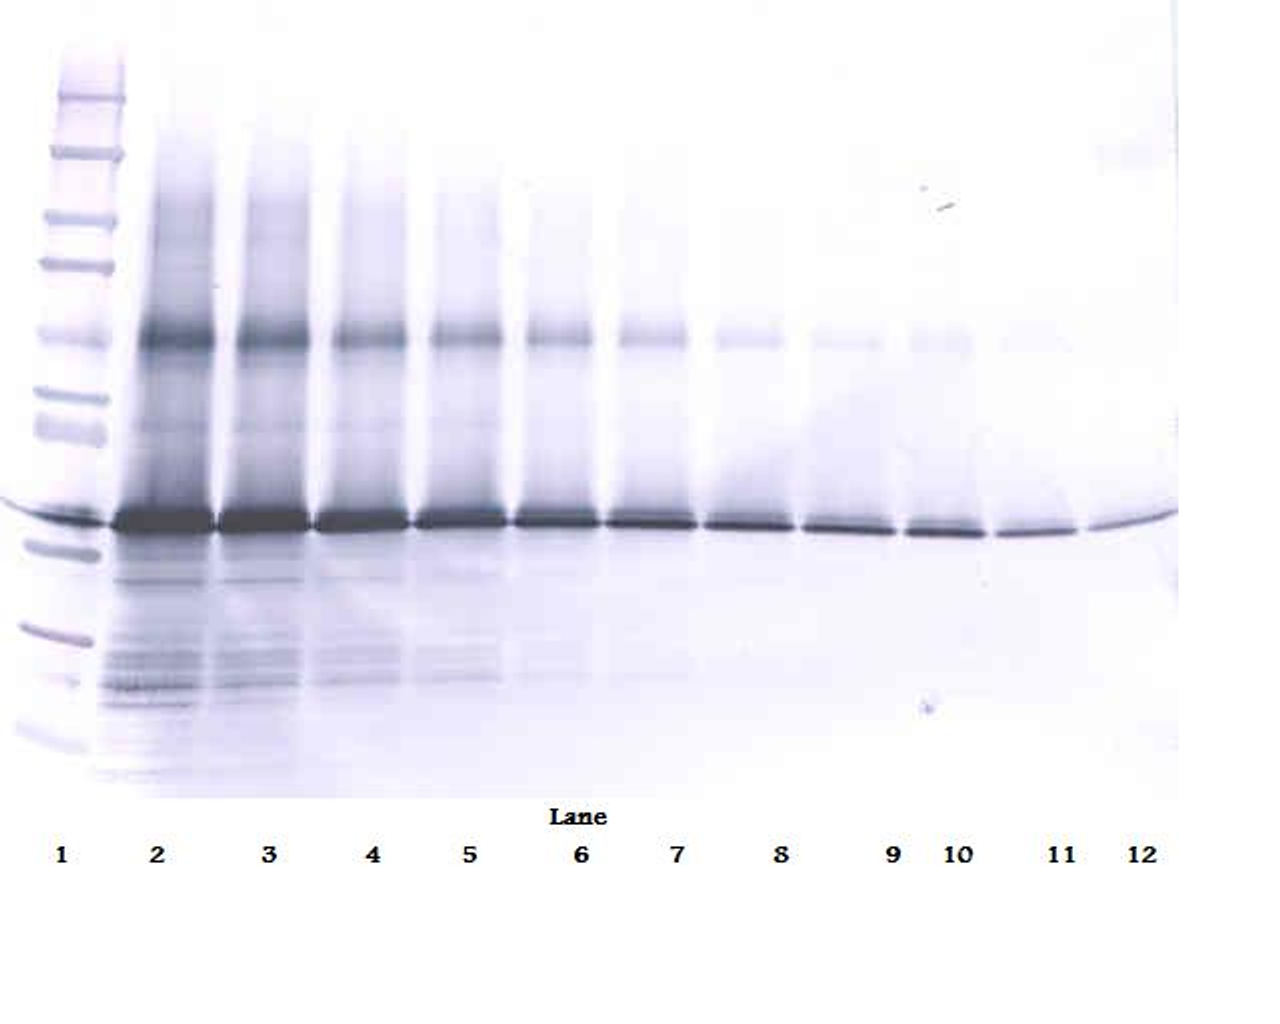 To detect hIGF-BP3 by Western Blot analysis this antibody can be used at a concentration of 0.1 - 0.2 ug/ml. Used in conjunction with compatible secondary reagents the detection limit for recombinant hIGF-BP3 is 1.5 - 3.0 ng/lane, under either reducing or non-reducing conditions.